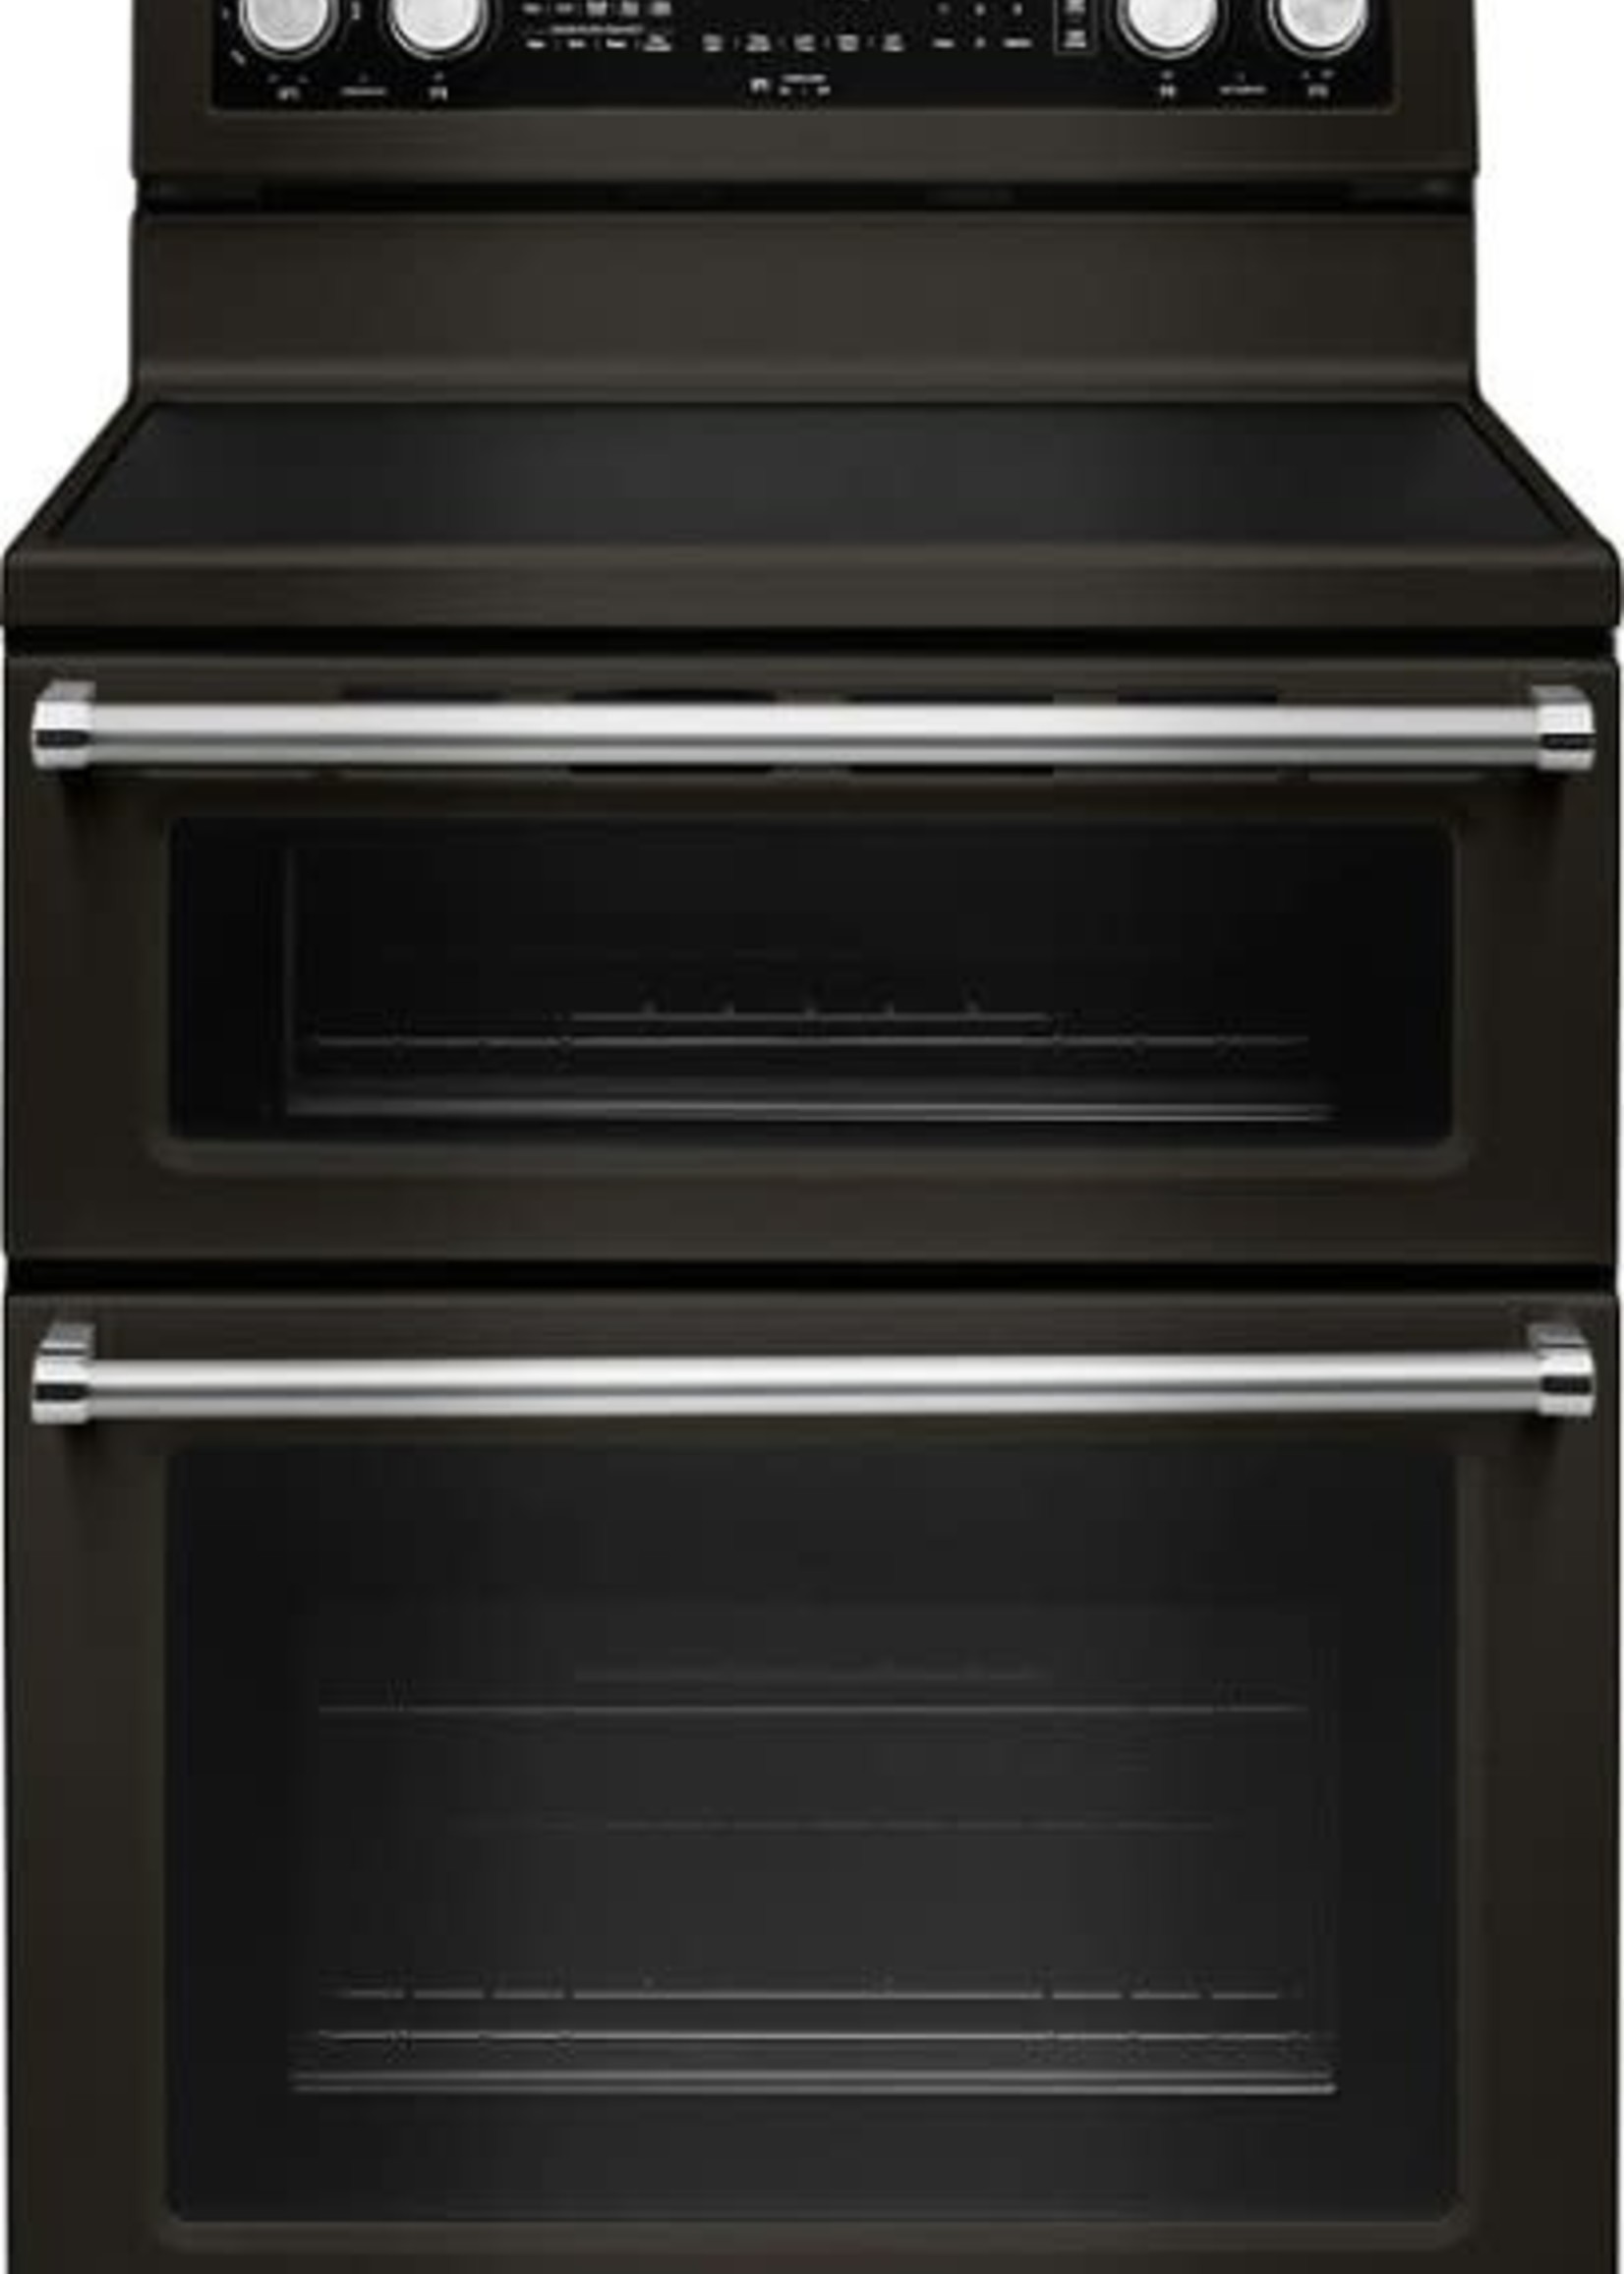 Kitchenaid *Kitchenaid KFED500EBS  30-in Smooth Surface 5 Elements 4.2-cu ft / 2.5-cu ft Self-cleaning Convection Oven Freestanding Double Oven Electric Range (Black Stainless with Printshield)